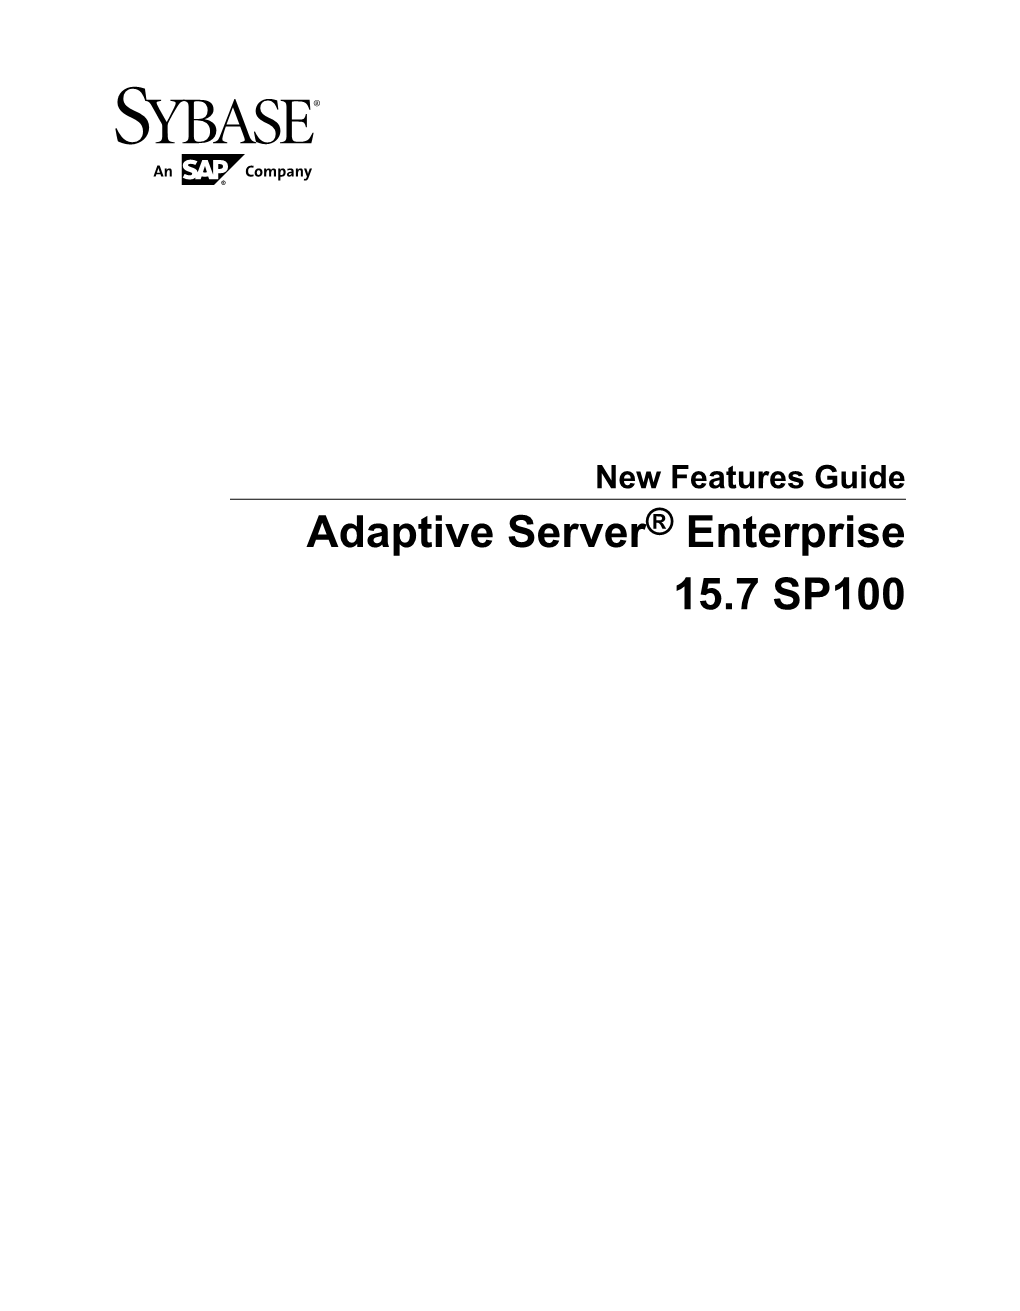 New Features Guide Adaptive Server® Enterprise 15.7 SP100 DOCUMENT ID: DC00641-01-1570100-02 LAST REVISED: July 2013 Copyright © 2013 by Sybase, Inc